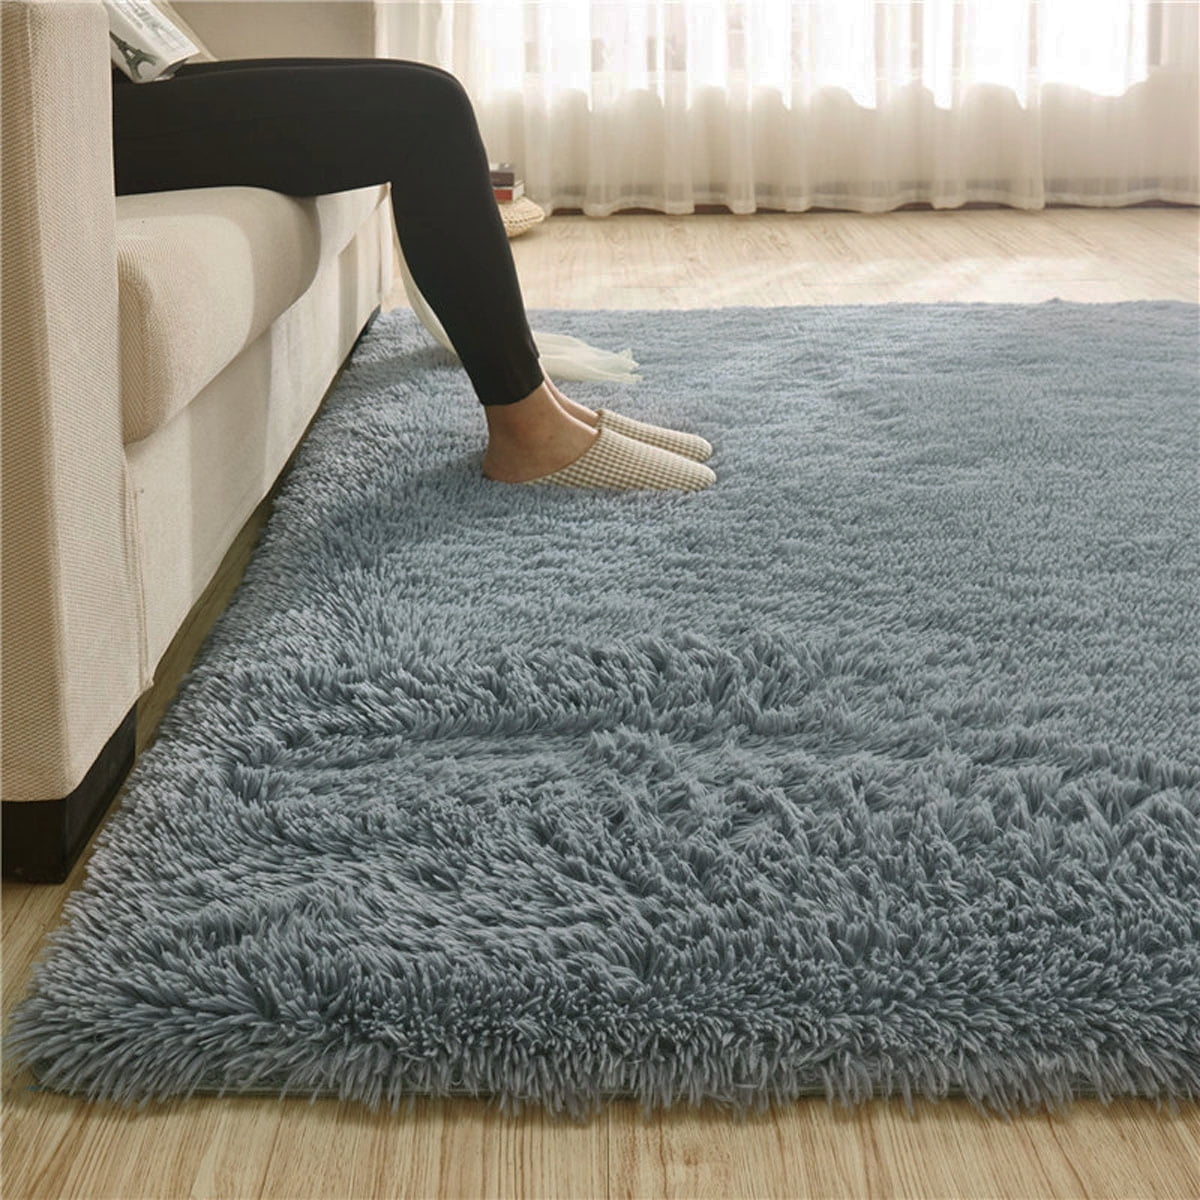 Super Soft Indoor Modern Rugs Fluffy Rugs,Anti-Skid Washable Shaggy Area Rug,  for Living Room Dining Room Home Bedroom Carpet Floor Mat,63x79''/47x63''/32x63''/20x63''/63x91''/32x47''/67x47'''  